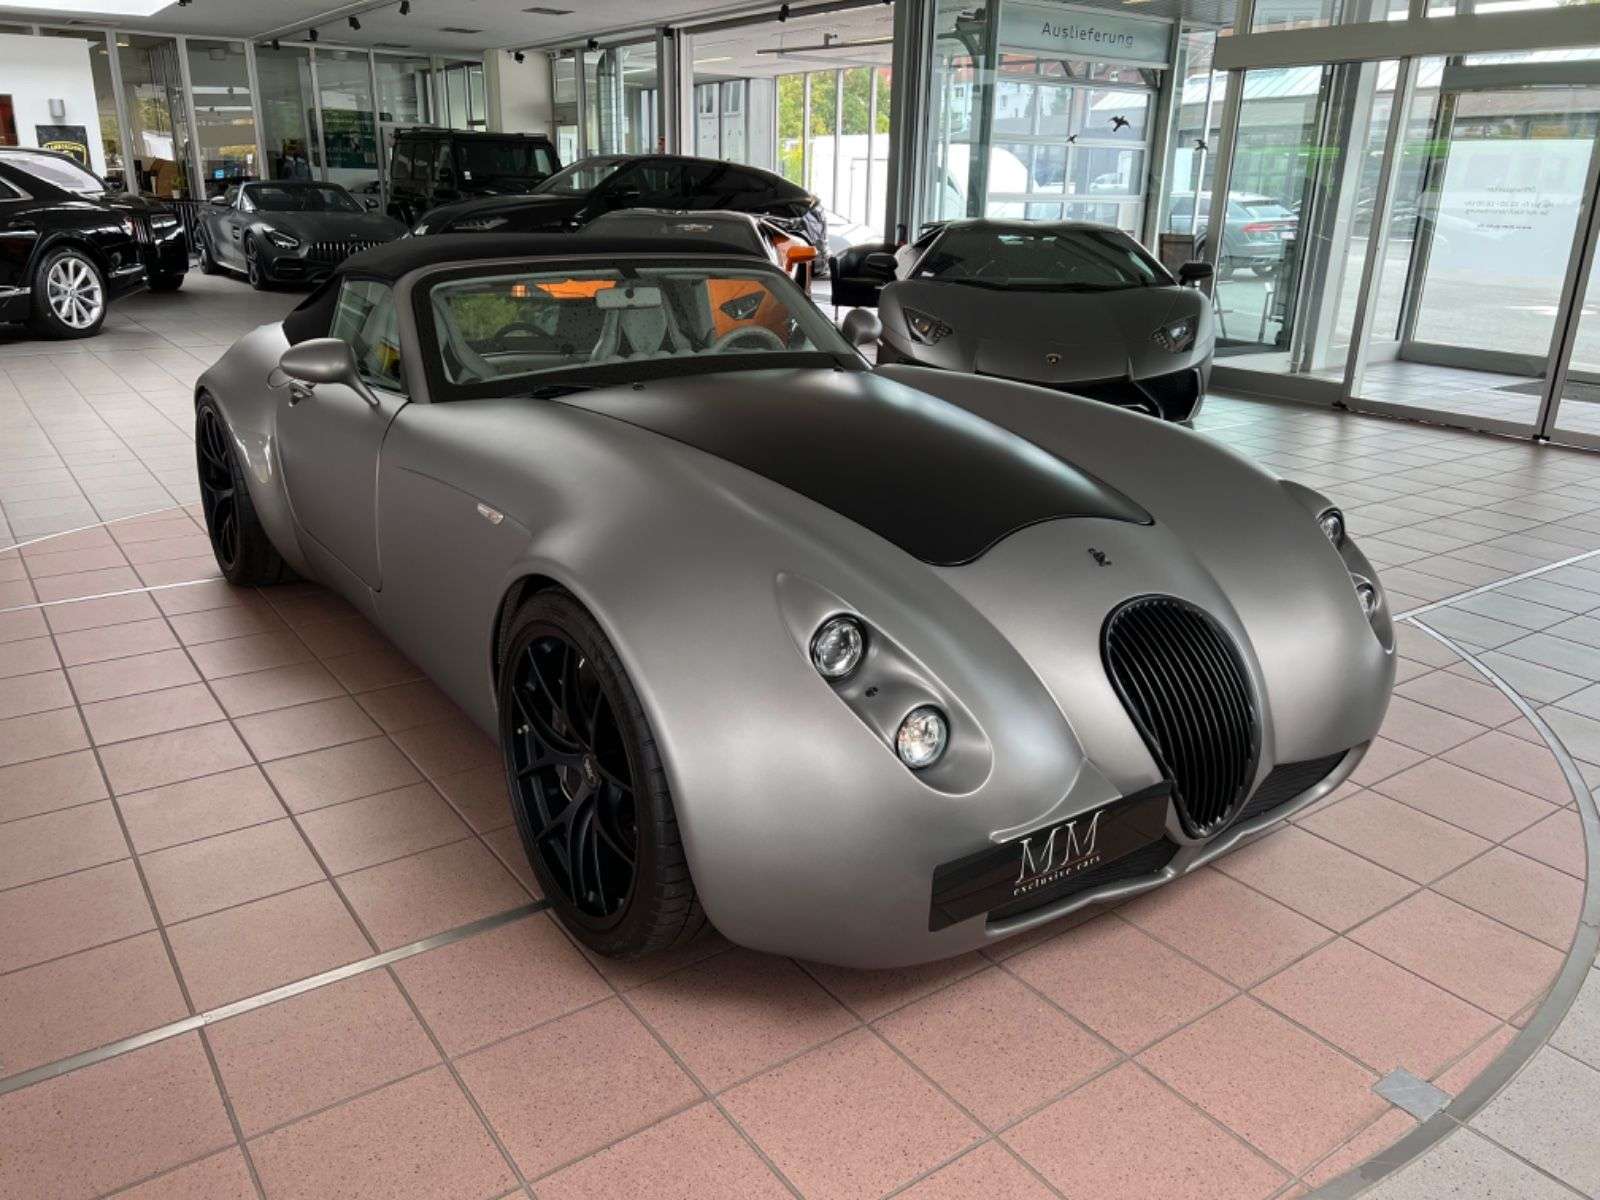 Wiesmann MF 5 Convertible in Grey used in Hannover for € 338,000.-